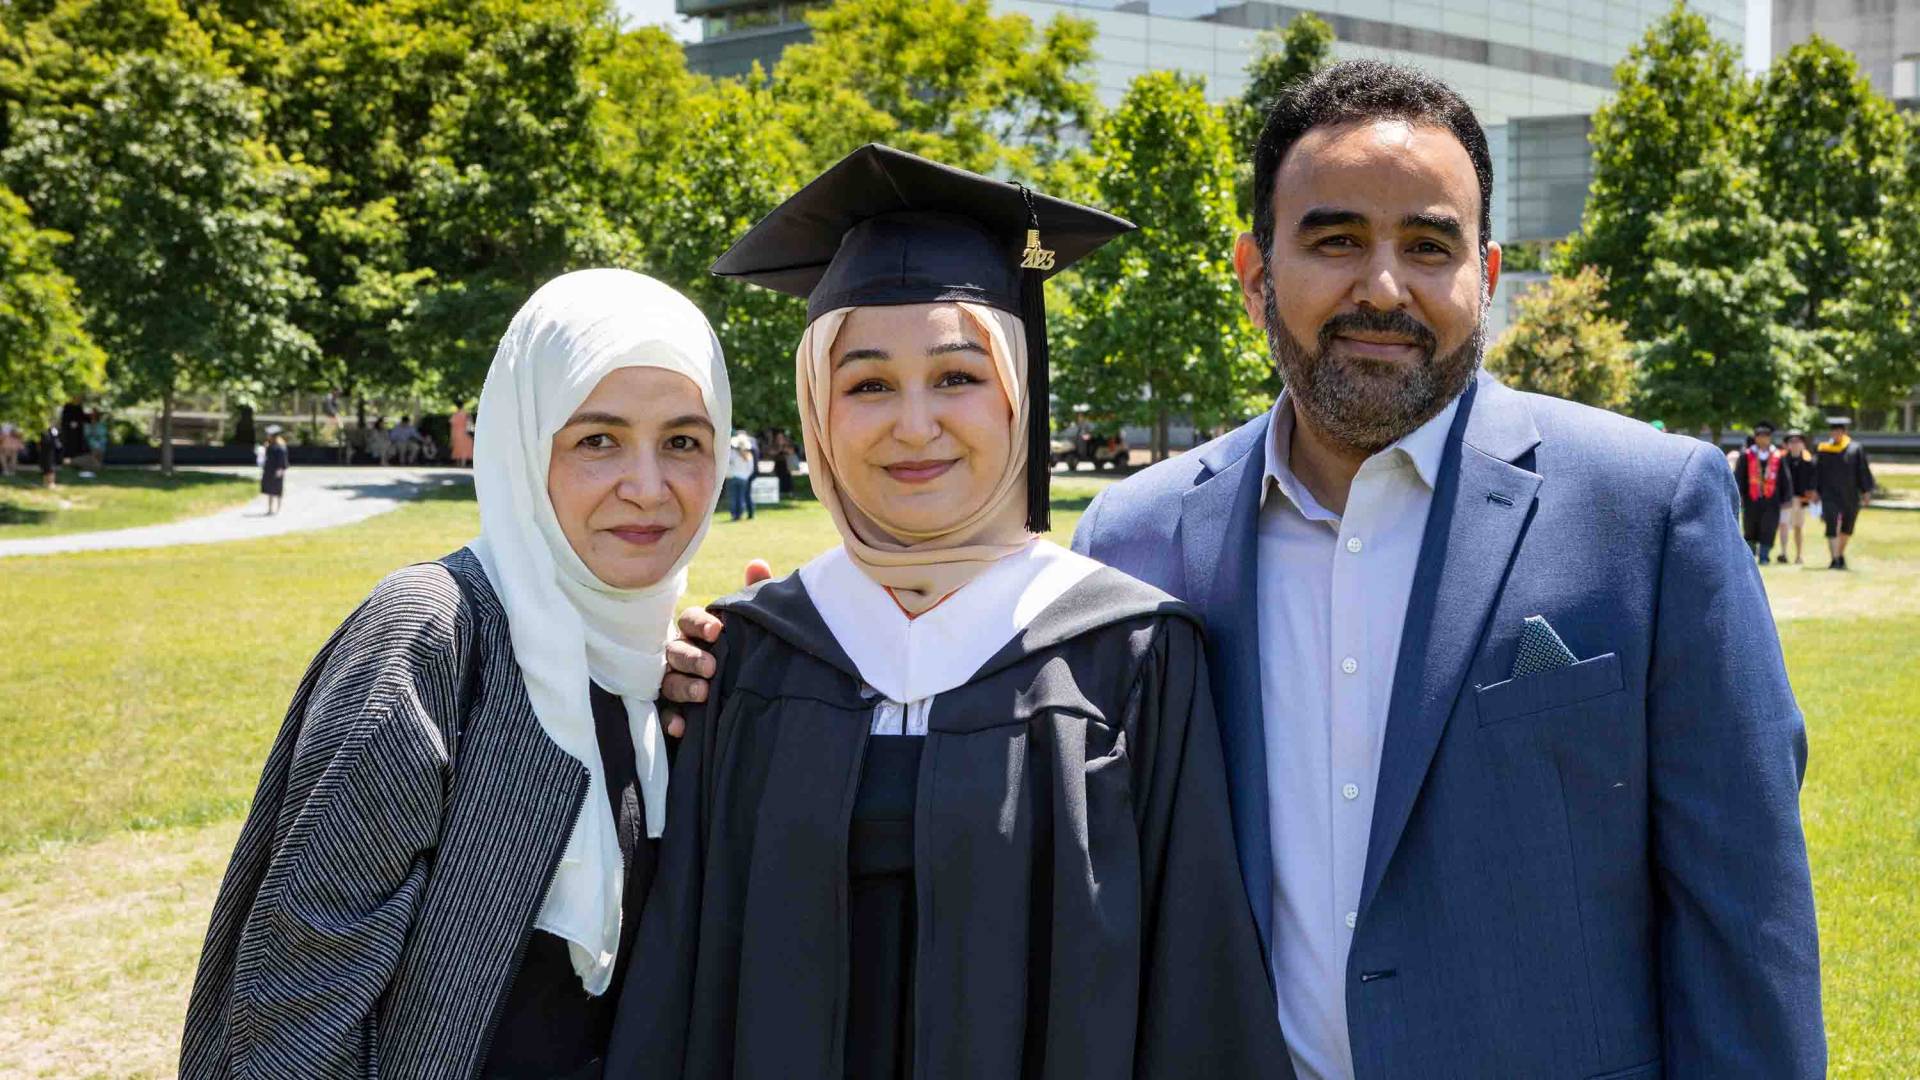 Graduate students smiling with her family